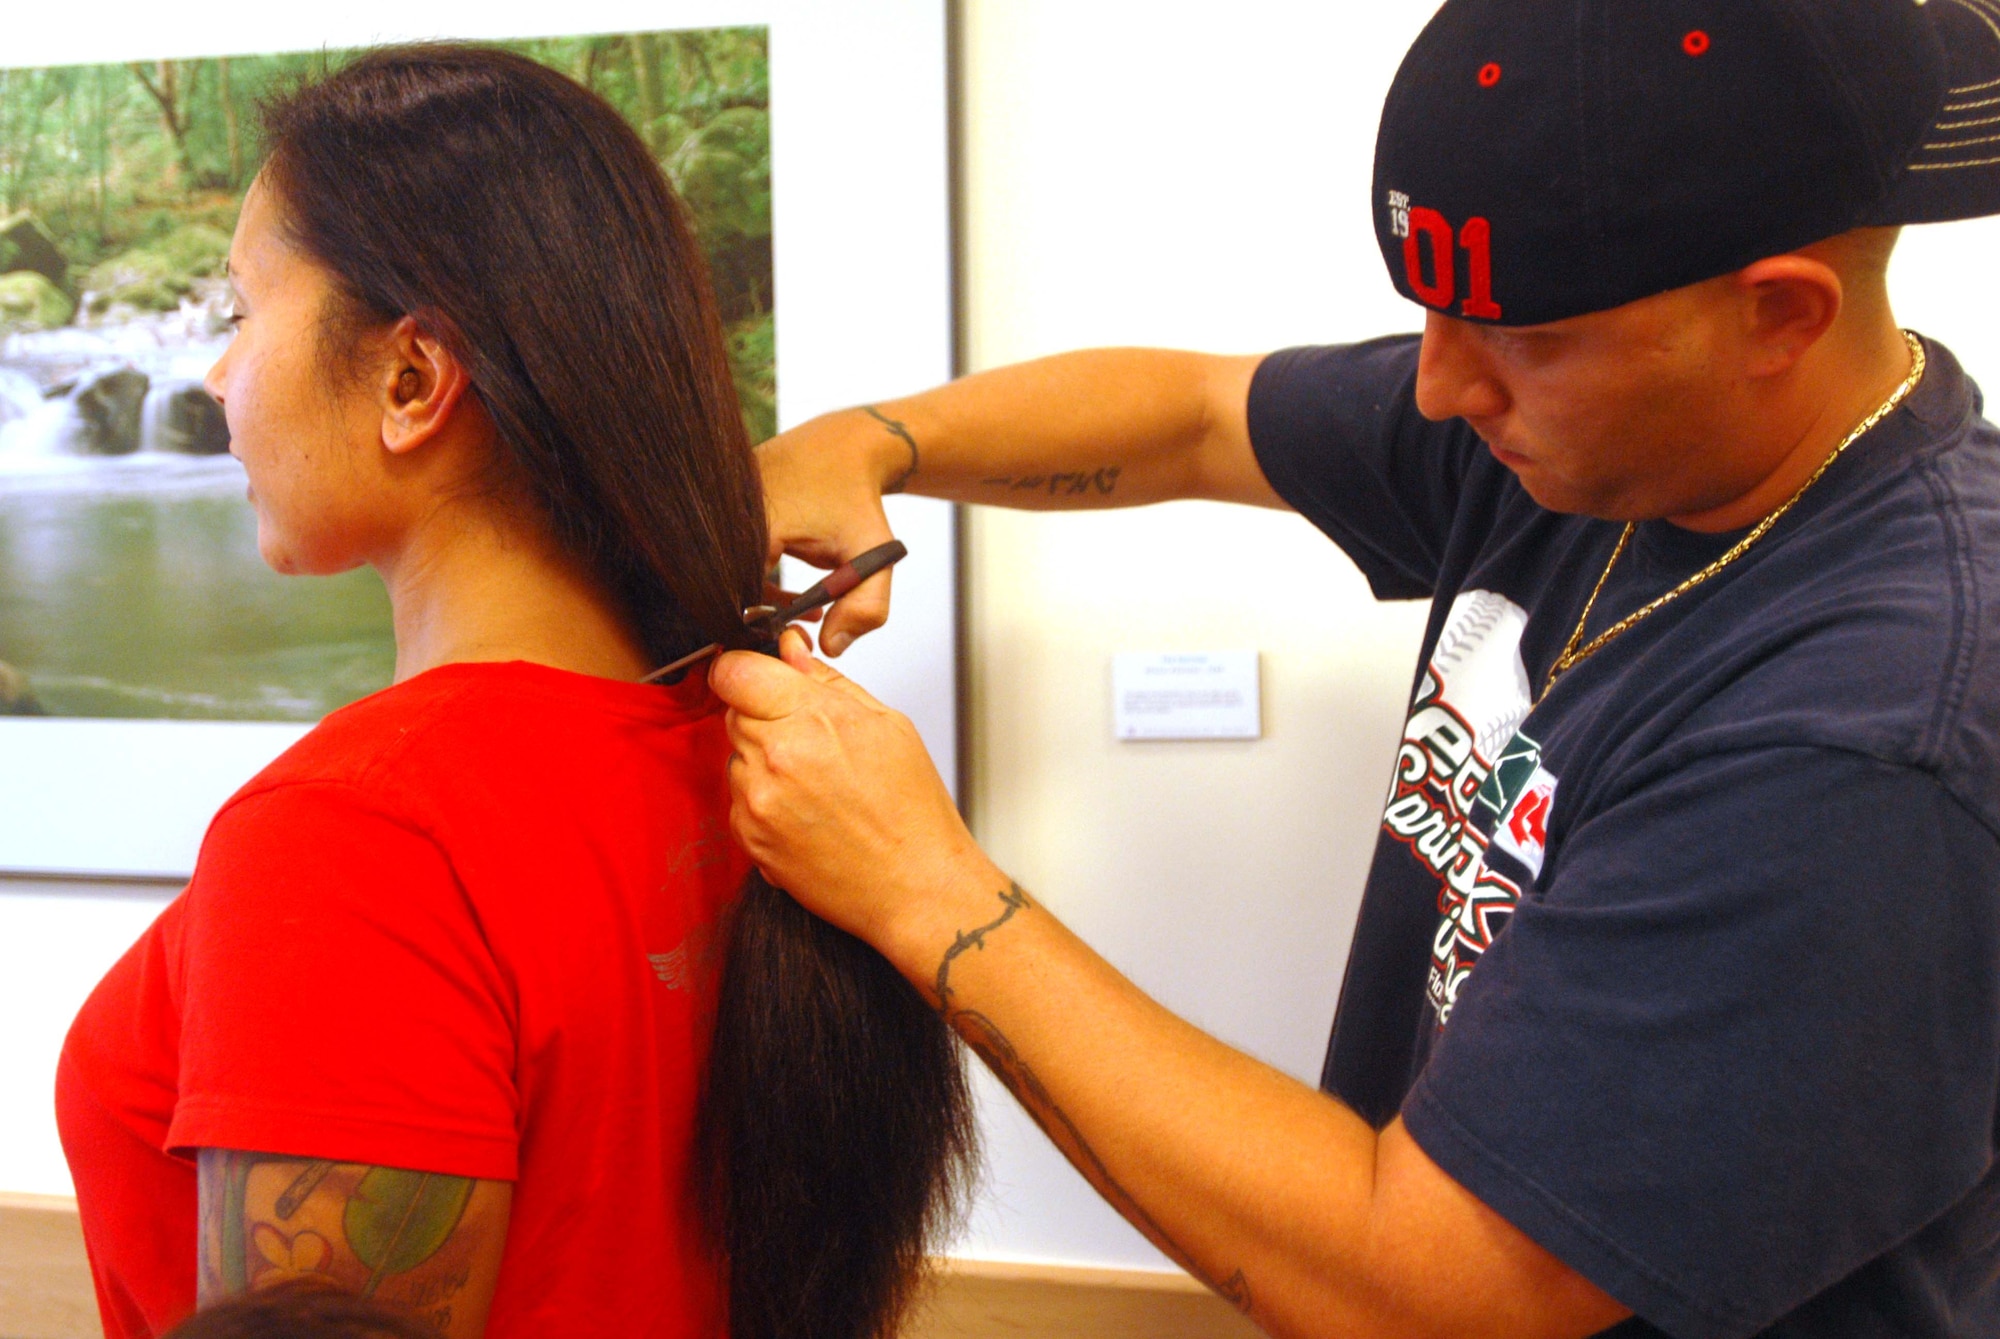 JOINT BASE PEARL HARBOR HICKAM, Hawaii – Staff Sgt. Jeremy Akerson, 15th Communications Squadron, cuts the hair of Tech. Sgt. Jenet Akerson, 692nd Intelligence, Surveillance and Reconnaissance Group Detachment 1, during the Give a Little, Give a Lock event here, May 21. All hair and money gathered through this donation is sent to Locks of Love. Locks of Love, a public non-profit organization, provides hairpieces to financially disadvantaged children in the United States and Canada under age 21 suffering from long-term medical hair loss. (U.S. Air Force photo/Senior Airman Gustavo Gonzalez)